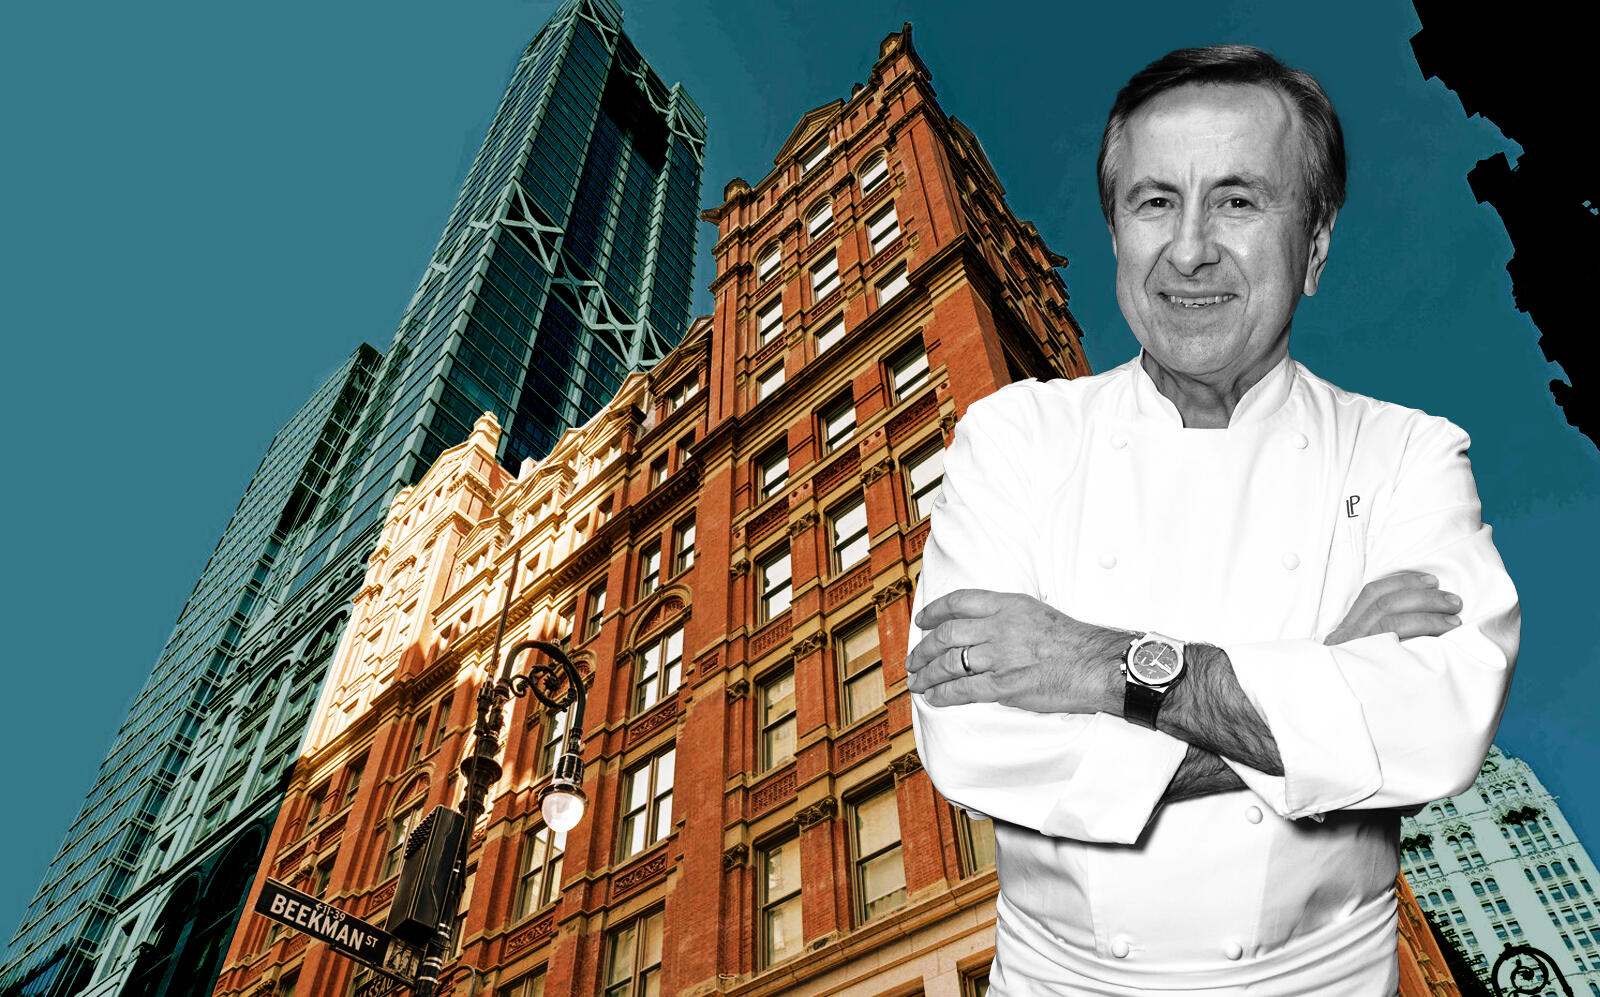 Daniel Boulud and the Beekman Hotel (Getty, GKV Architects)